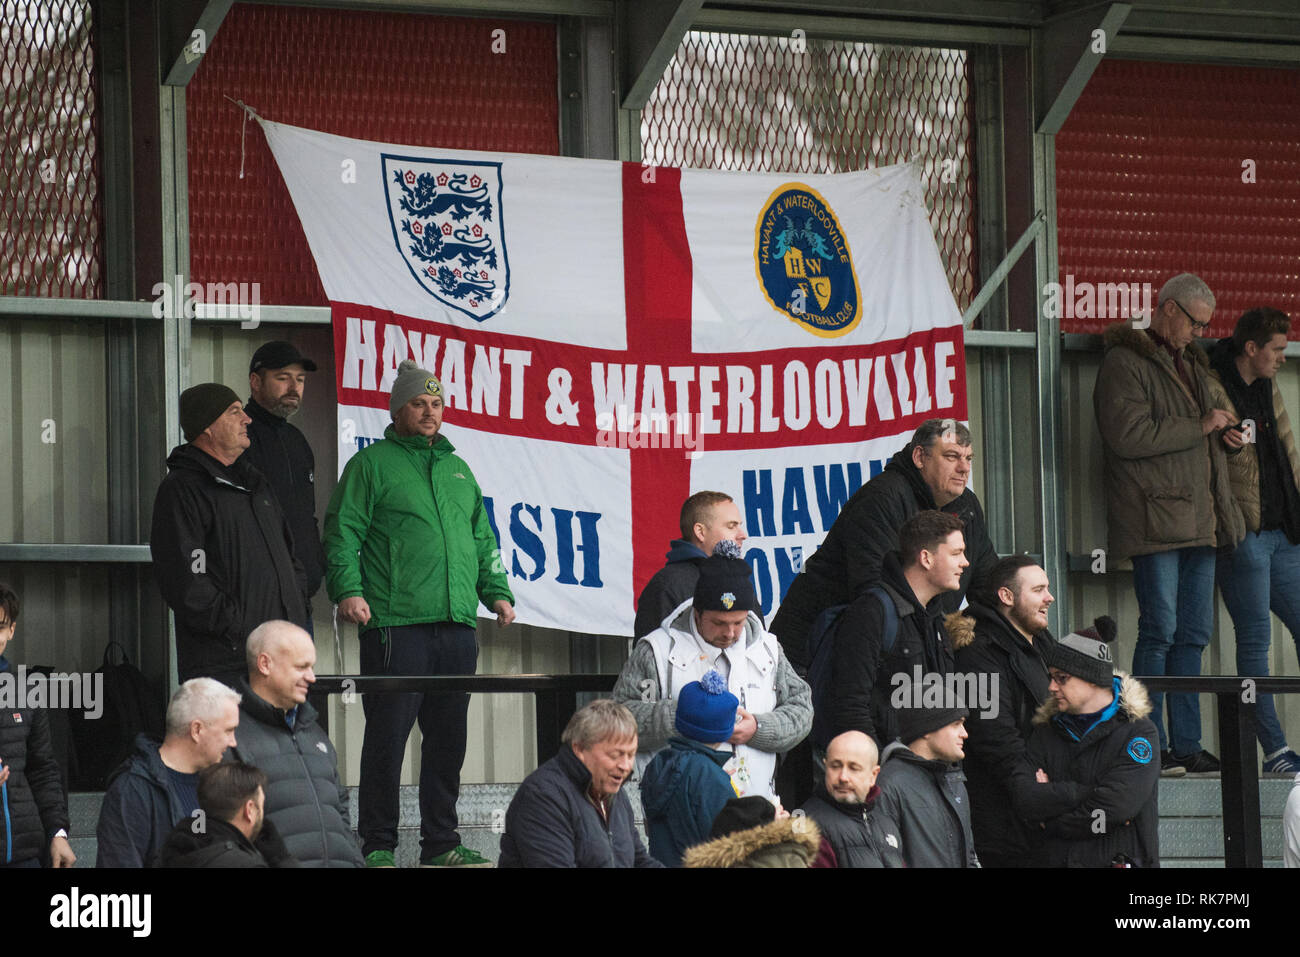 Havant and Waterlooville Banner. Salford City FC. Stock Photo